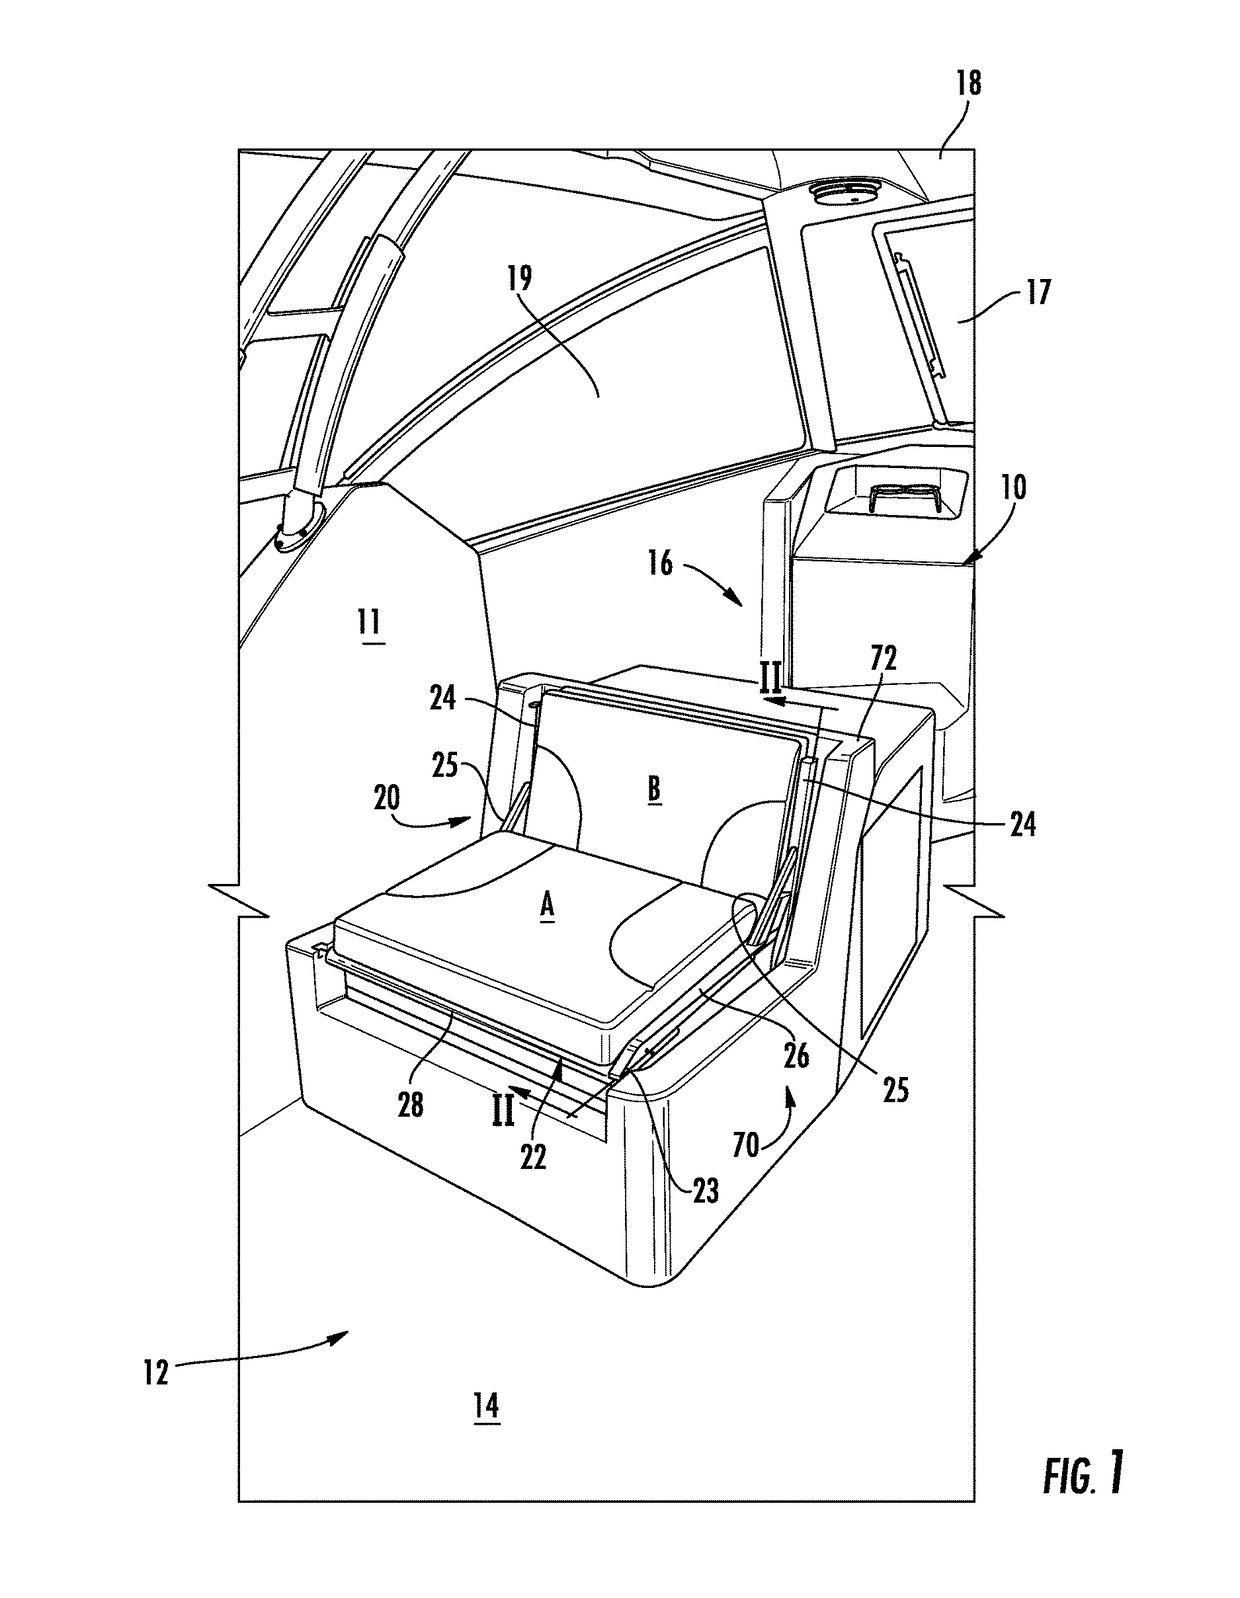 Multiple position boat seat